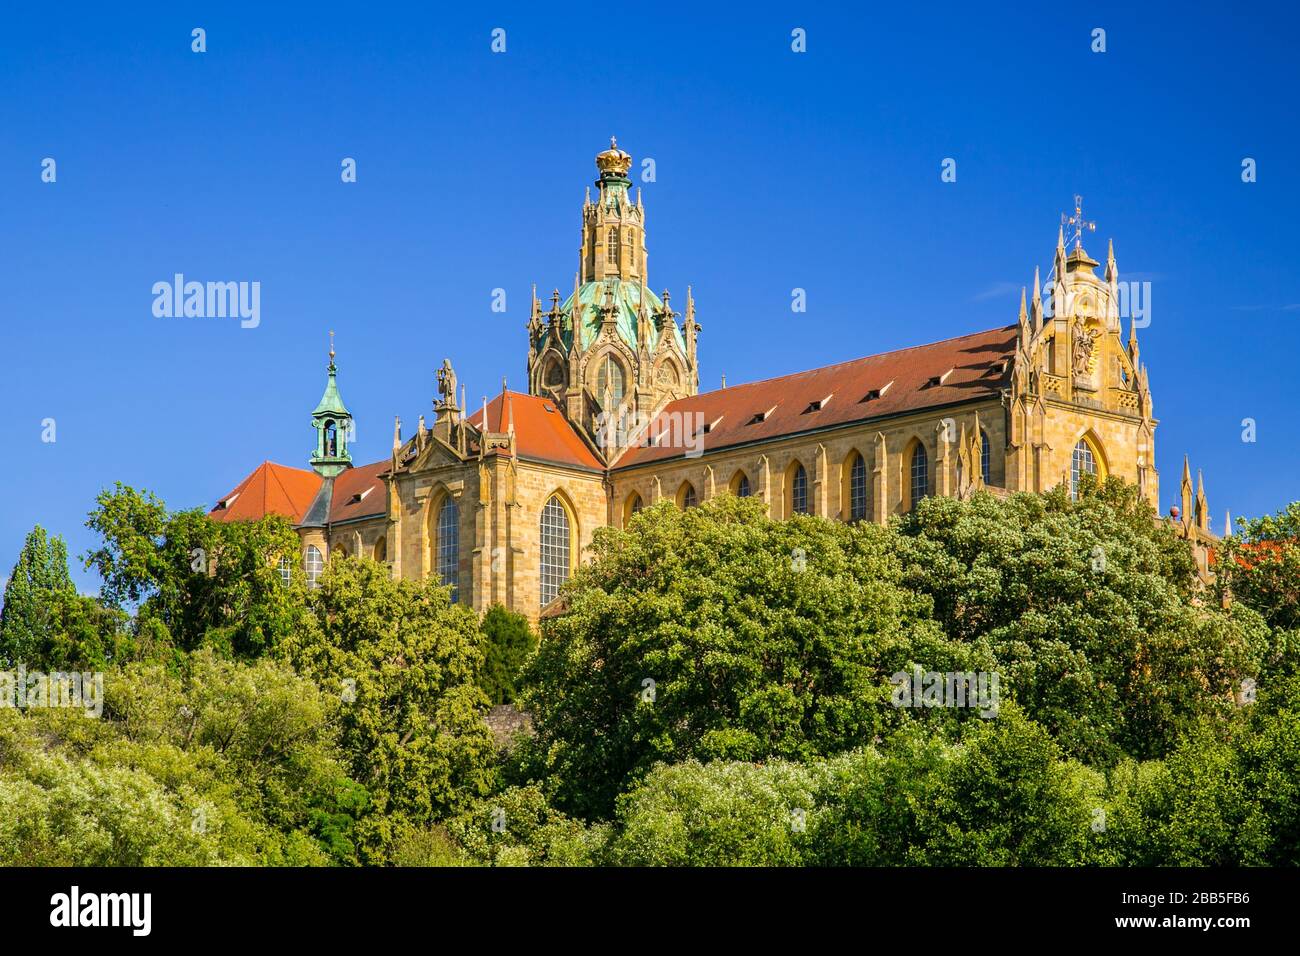 Monumental monastery of Benedictines in Kladruby, Czech Republic, Europe from 12th century standing on hill, includes church of All Saints. Stock Photo